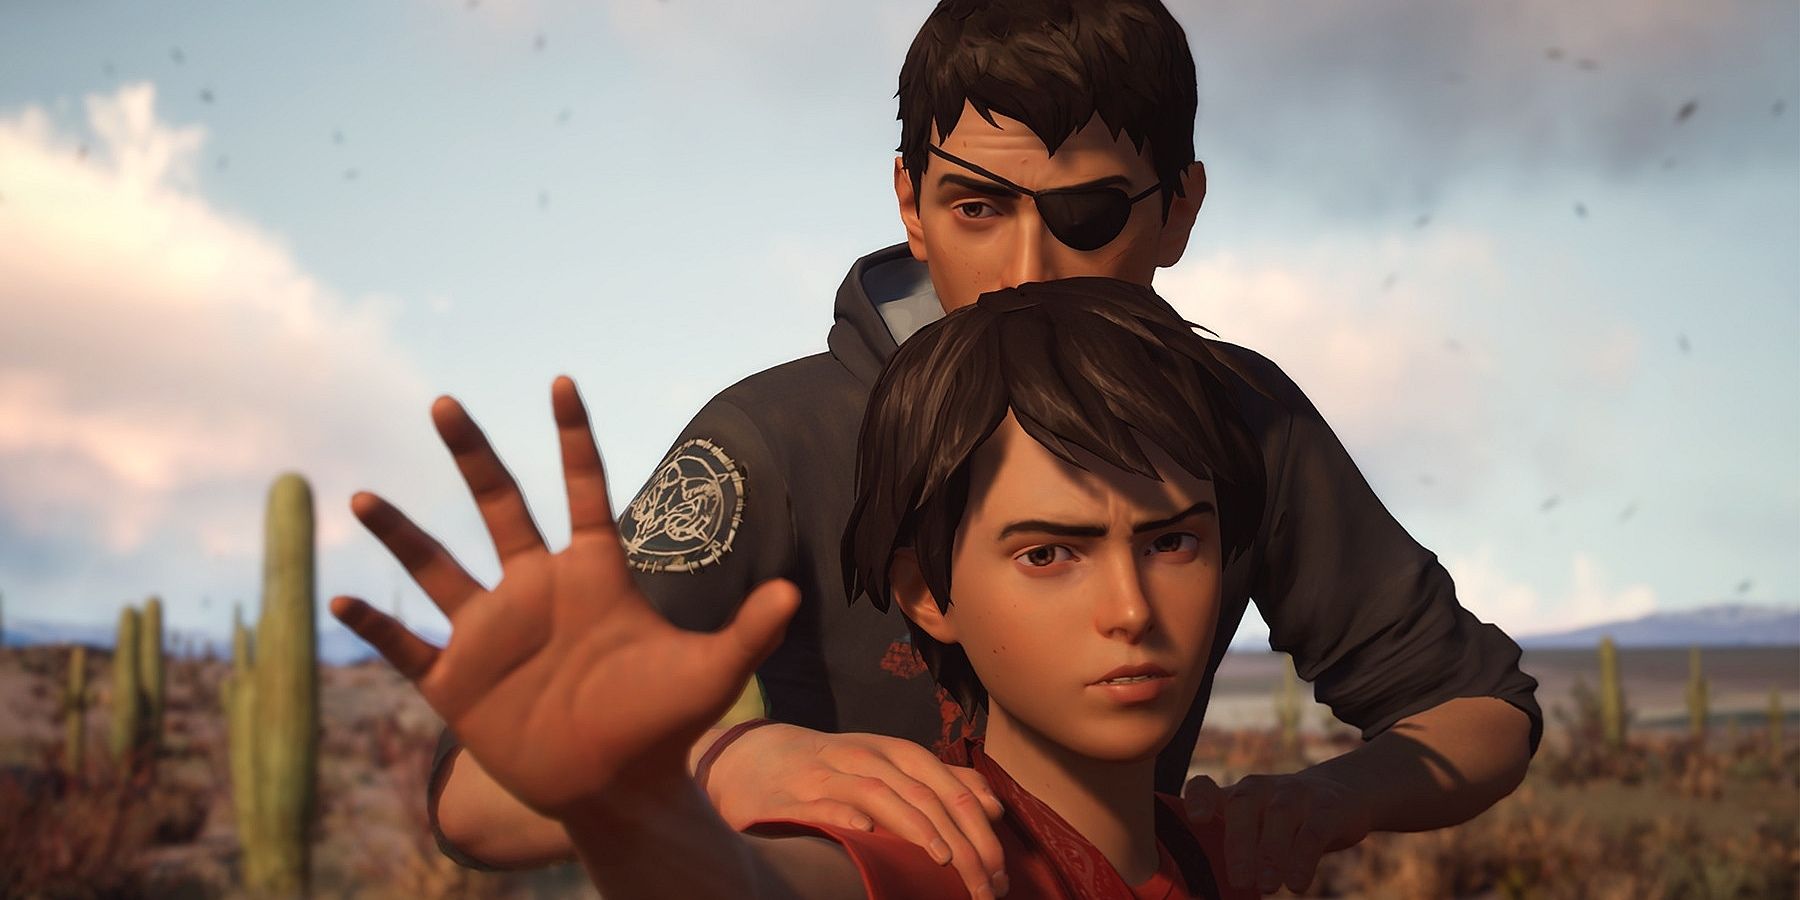 Brothers from Life is Strange 2.